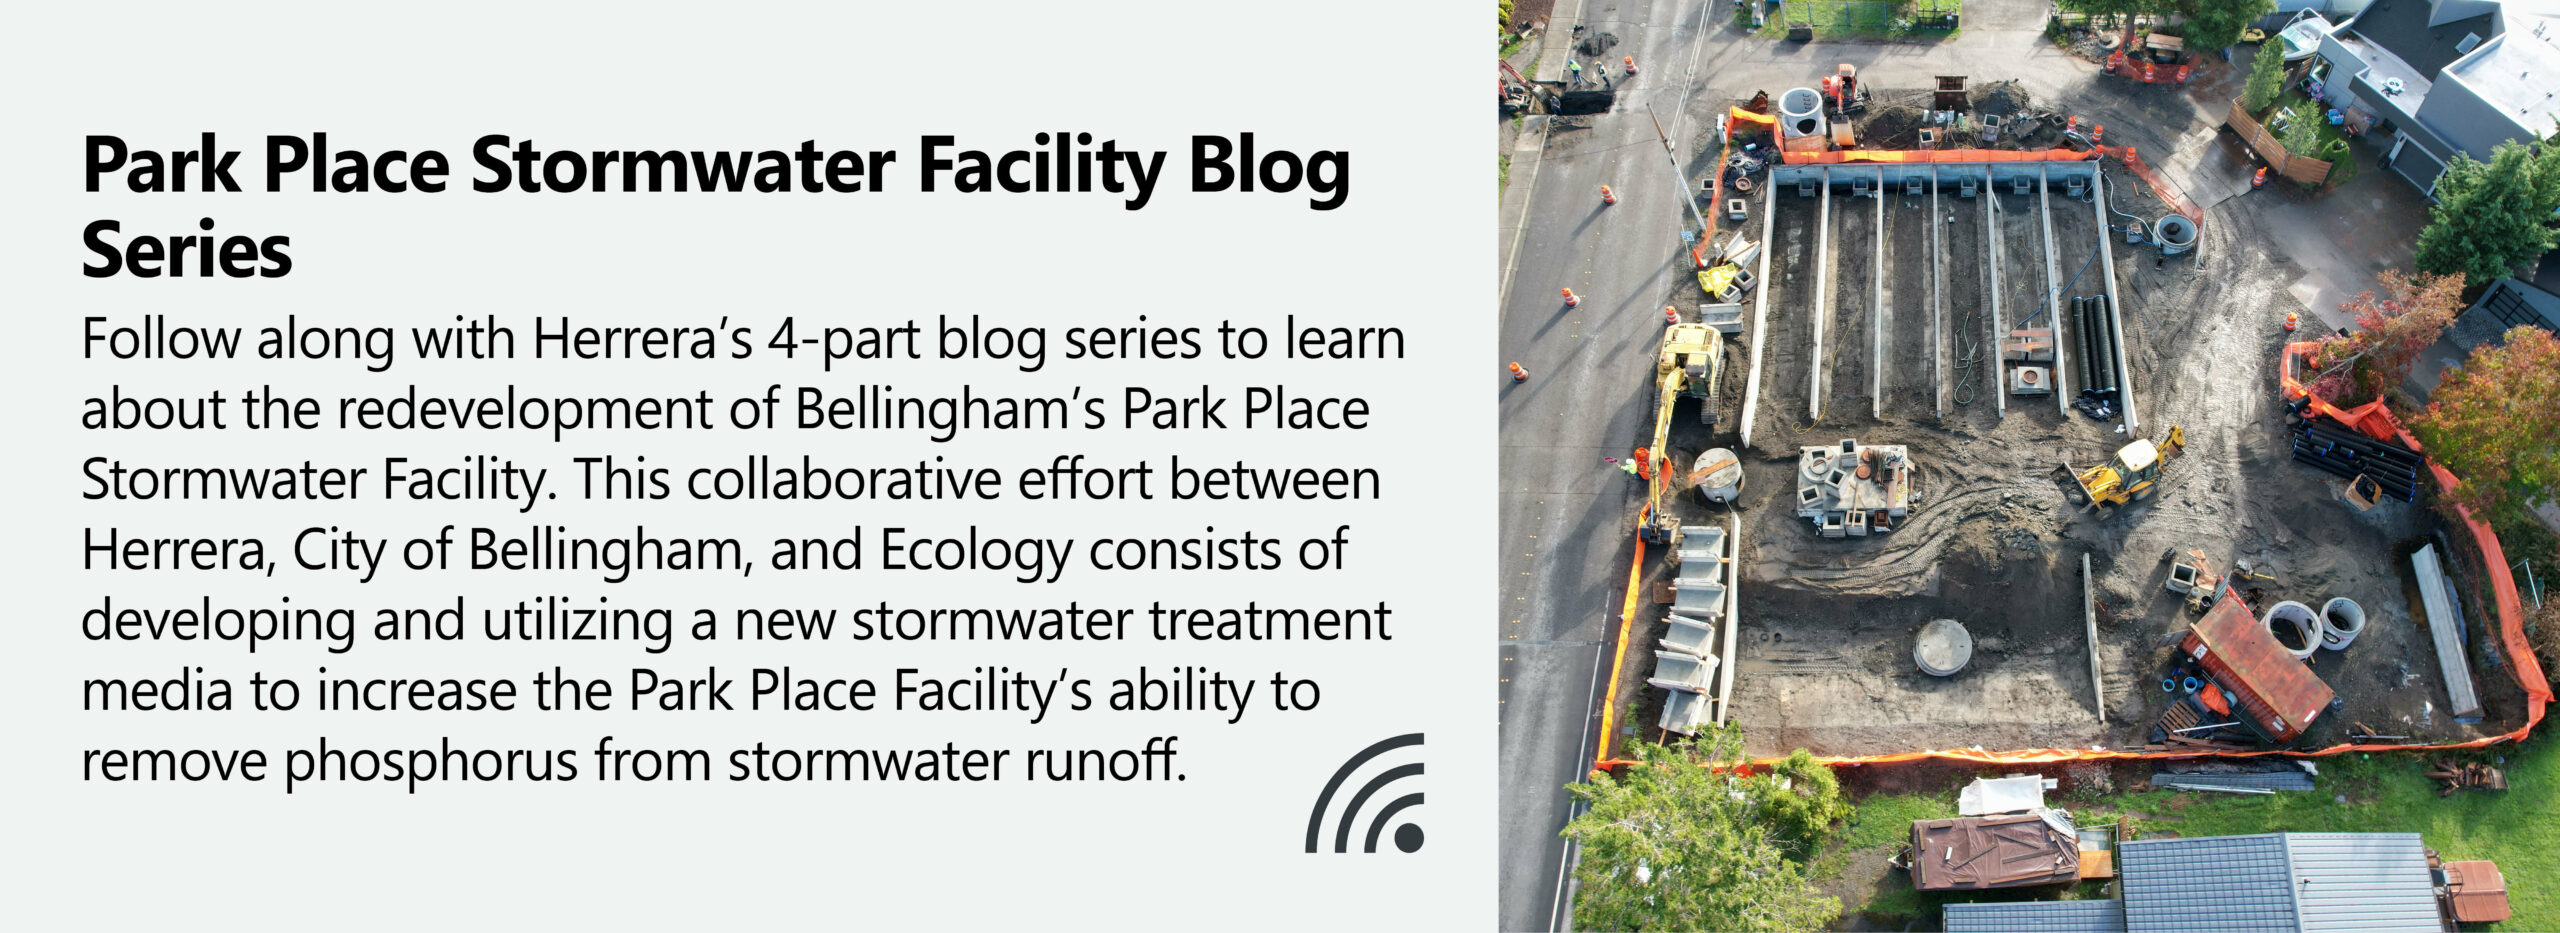 Q2-park-place-stormwater-facility